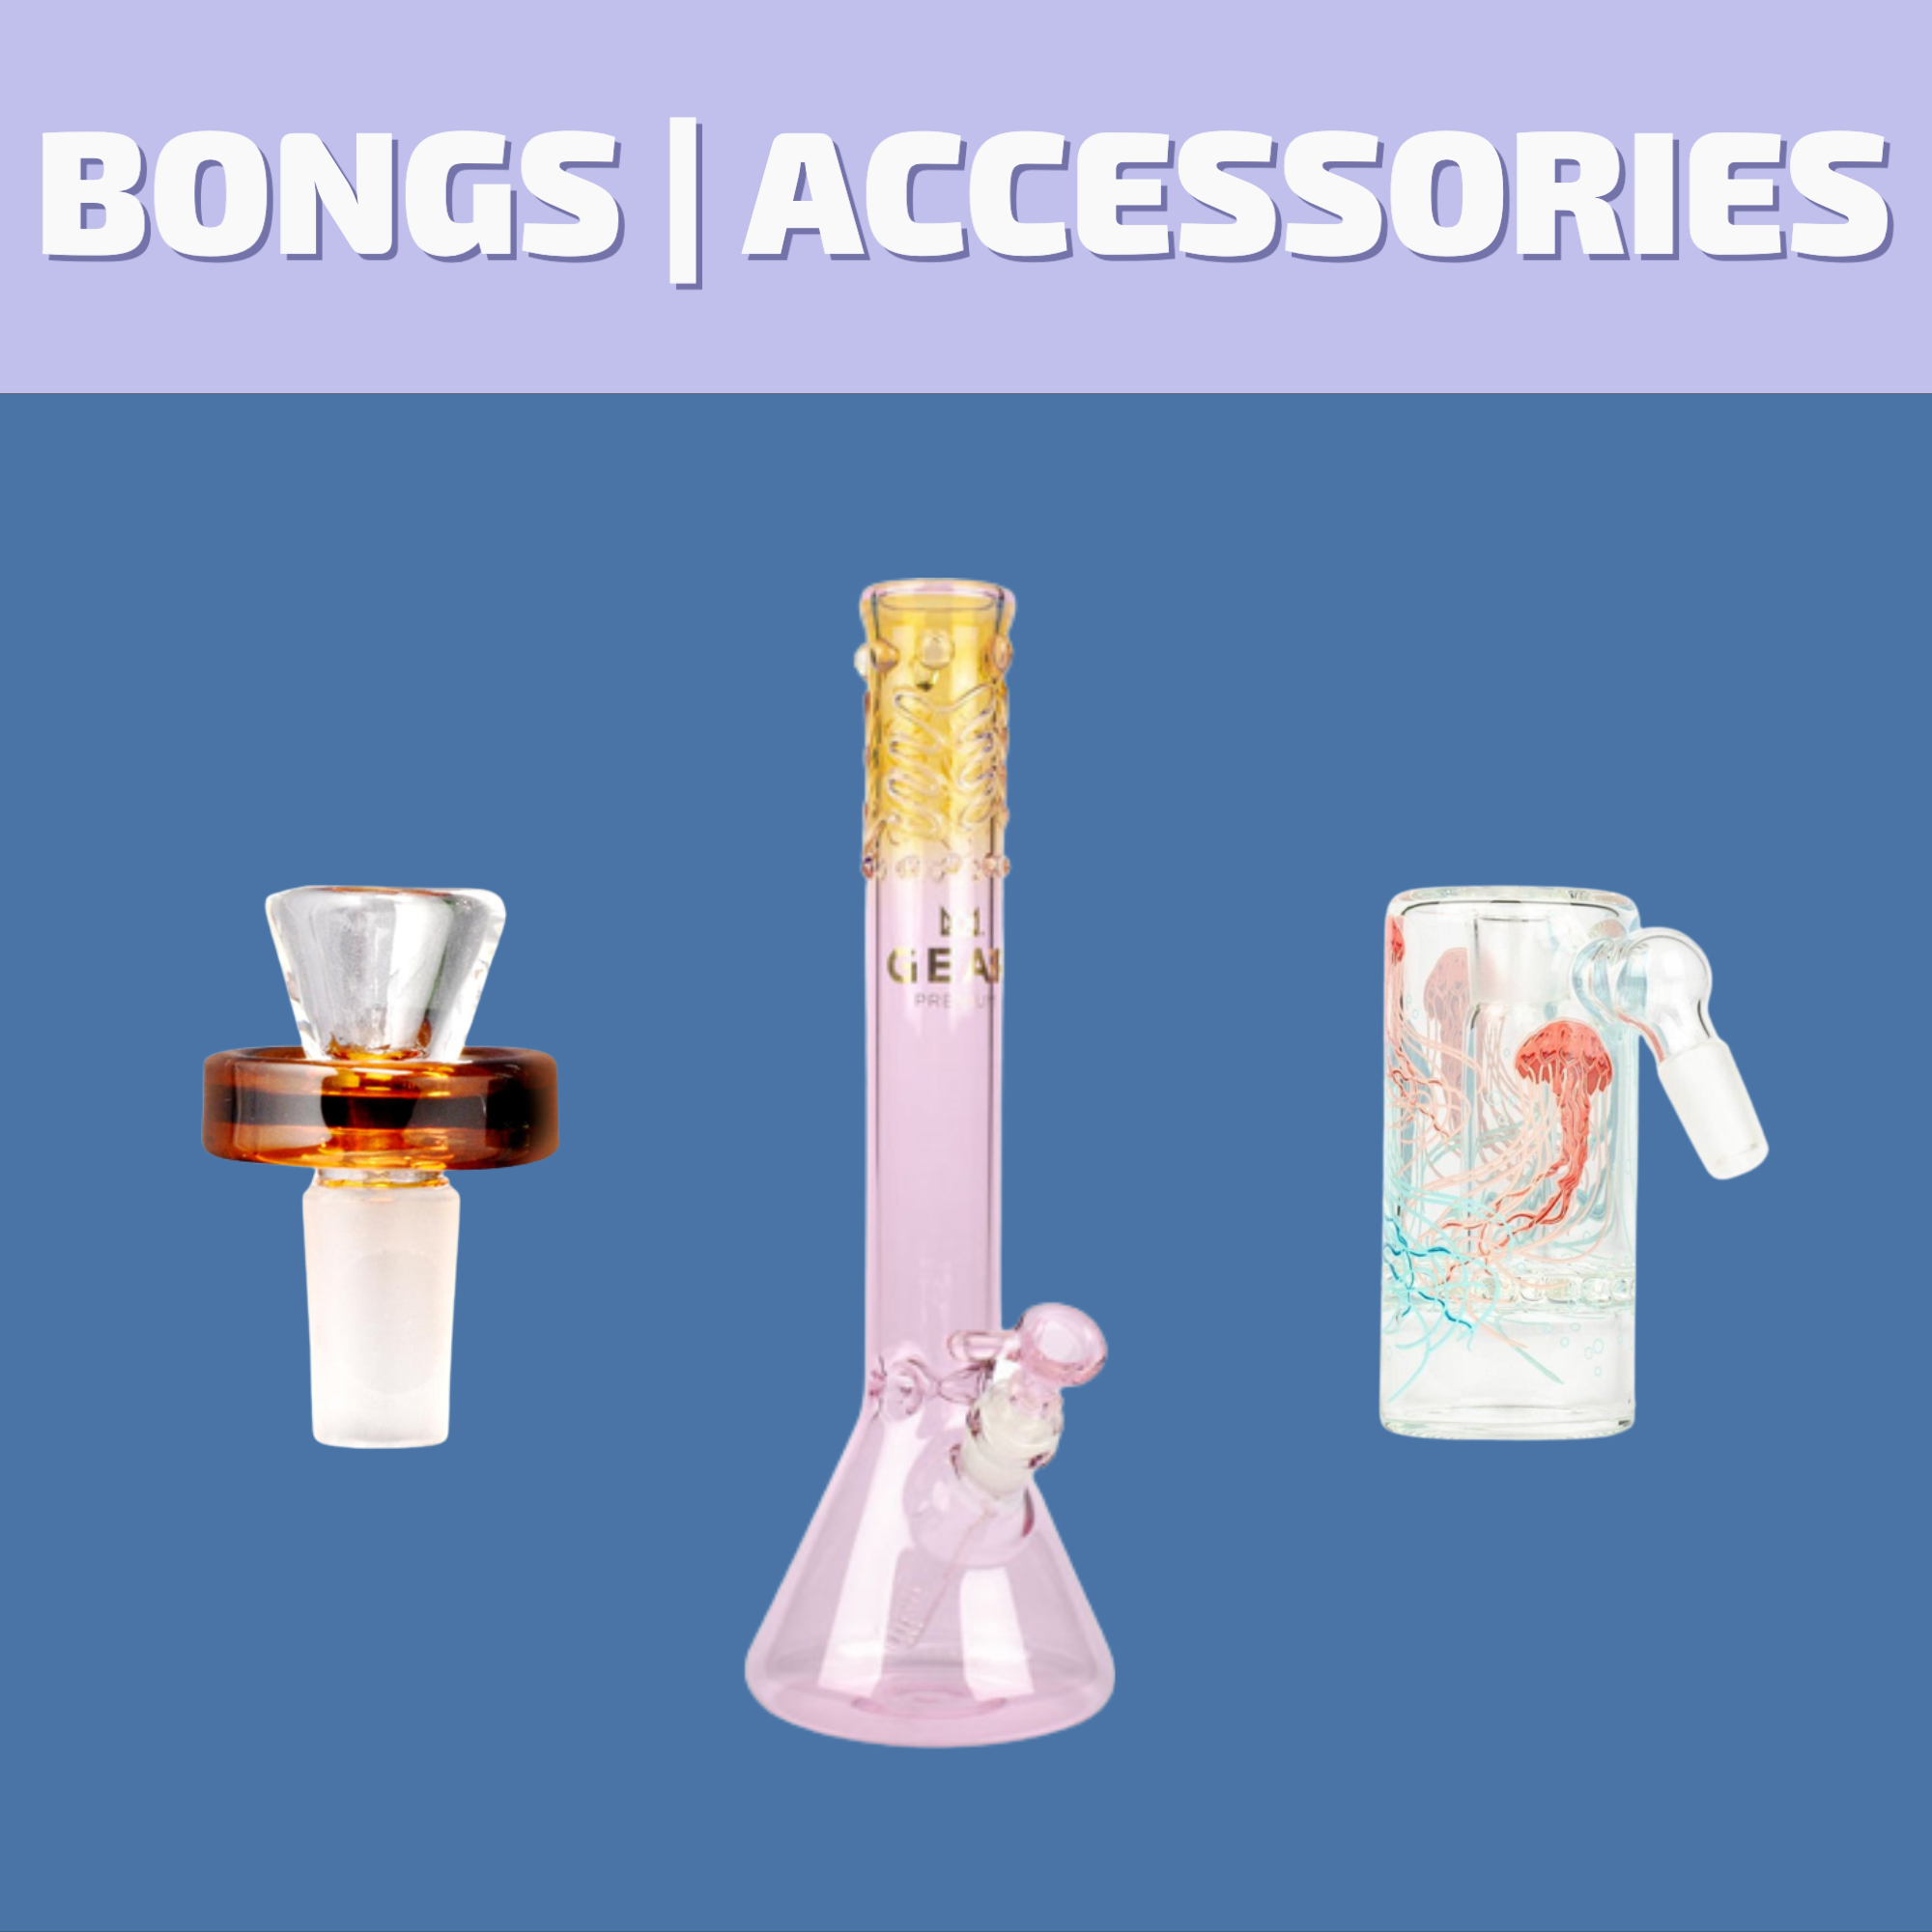 Shop the best selection of Bongs, Bowls, Cleaners, and Ash Catchers online for same day delivery in Winnipeg or visit our dispensary on 580 Academy Road.  